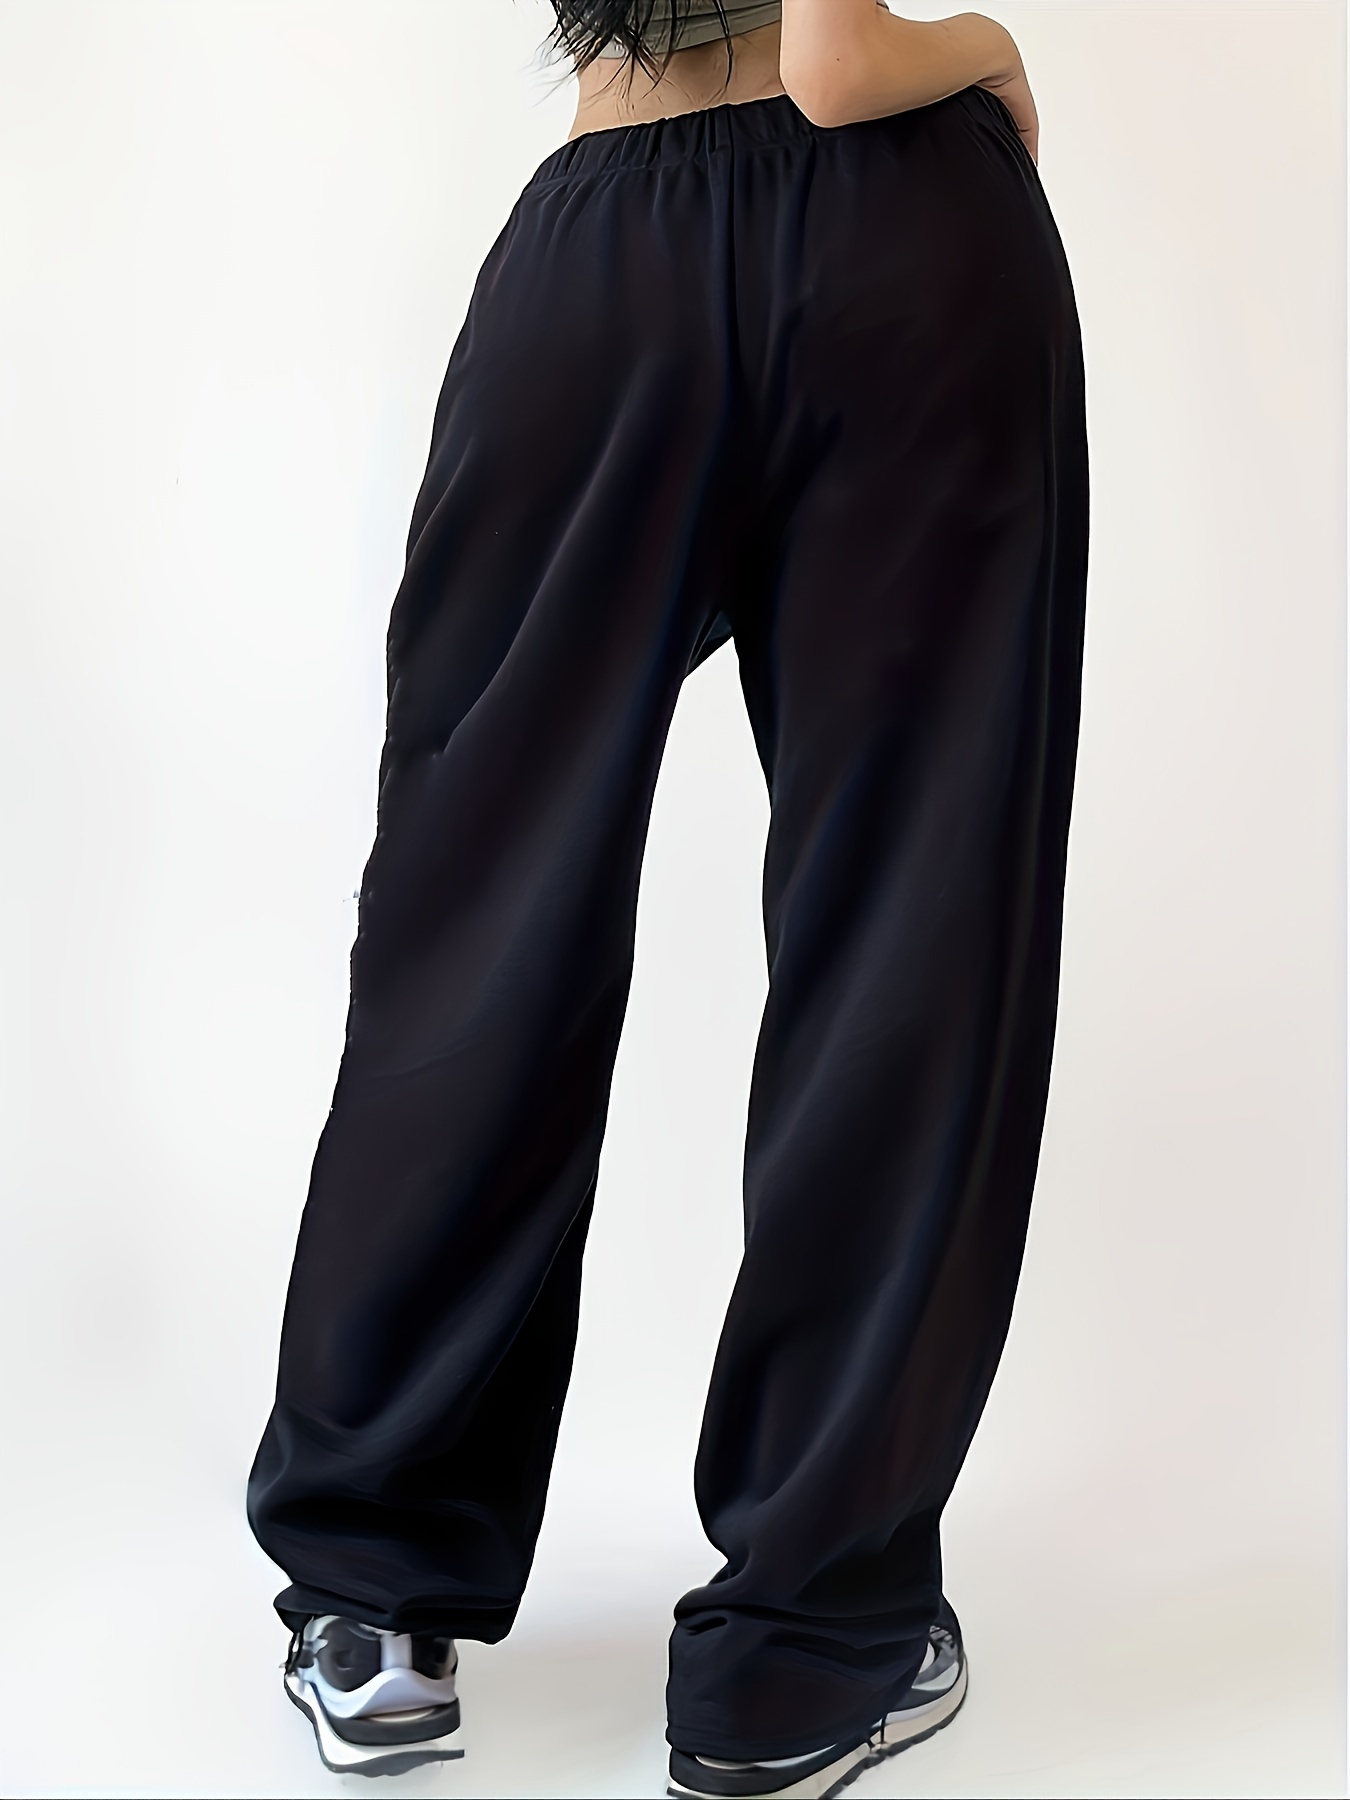 LU Quick Dry Drawstring All In Motion Joggers For Women And Men Perfect For  Sport, Yoga, Gym And Casual Wear With Elastic Waist And Pockets From  September887, $23.86